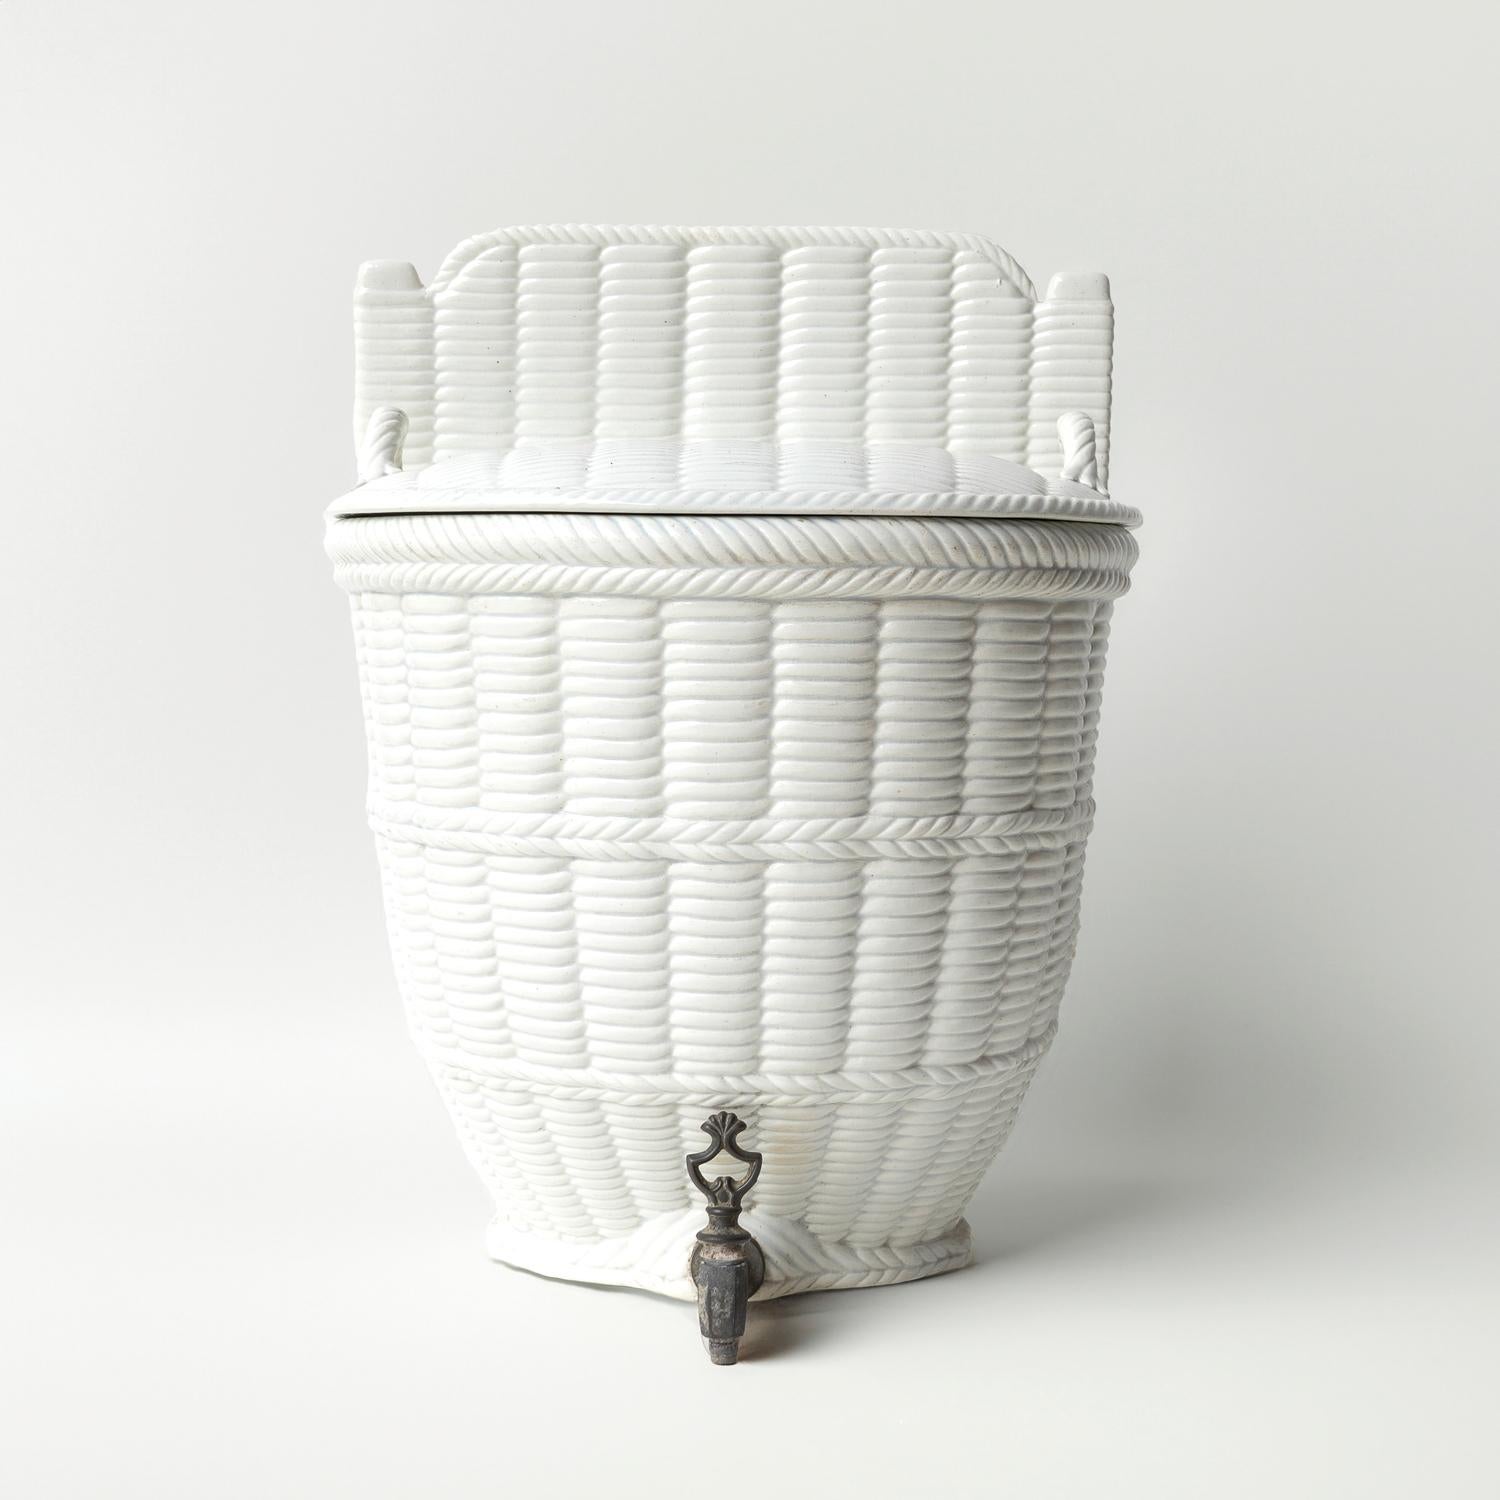 ANTIQUE LAVABO

Made from white glazed earthenware in the form of a woven basket with a decorative metal tap.

Originally designed to hold water or other liquids which could then be dispensed using the tap.

The underneath is stamped with the mark